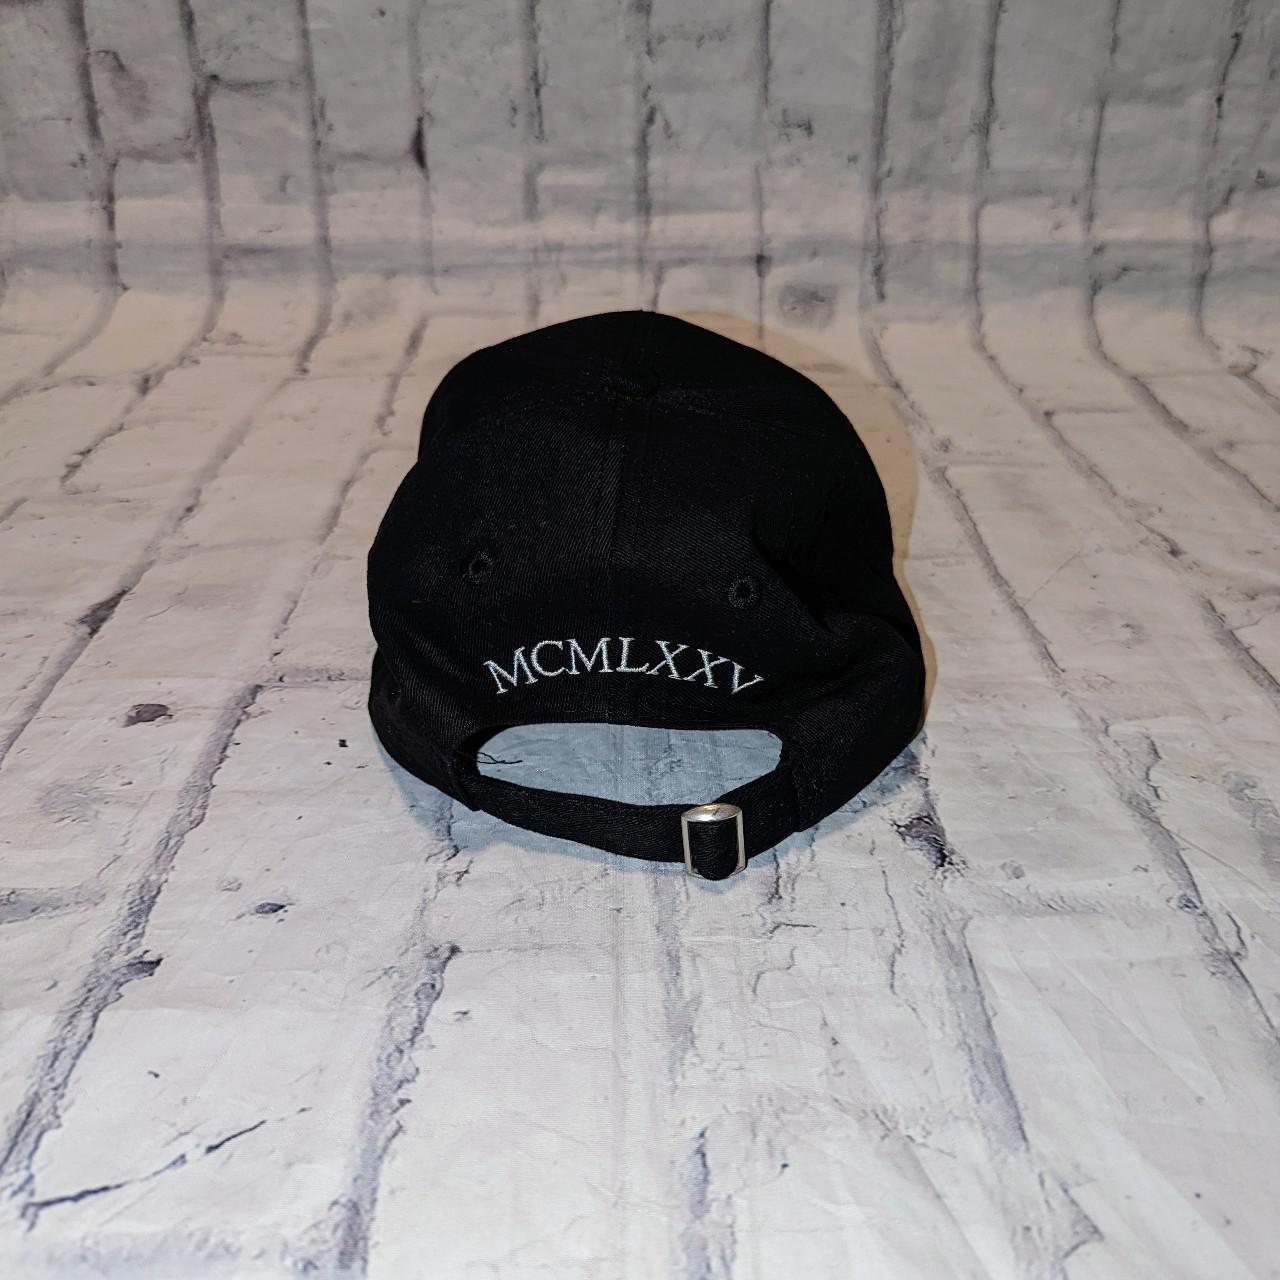 Product Image 2 - Members Only embroidered script hat

Gently